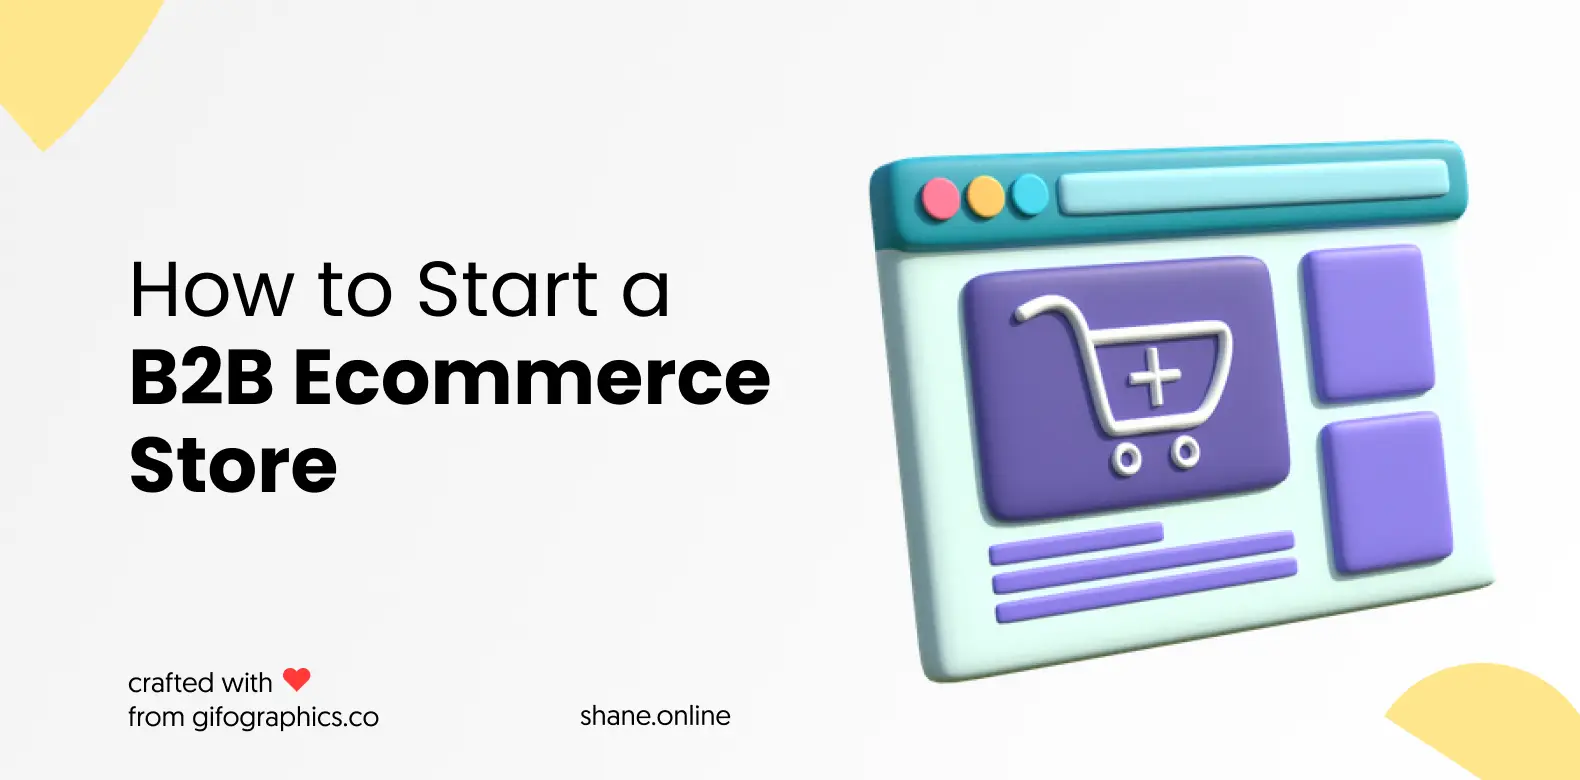 How to Start a B2B Ecommerce Store